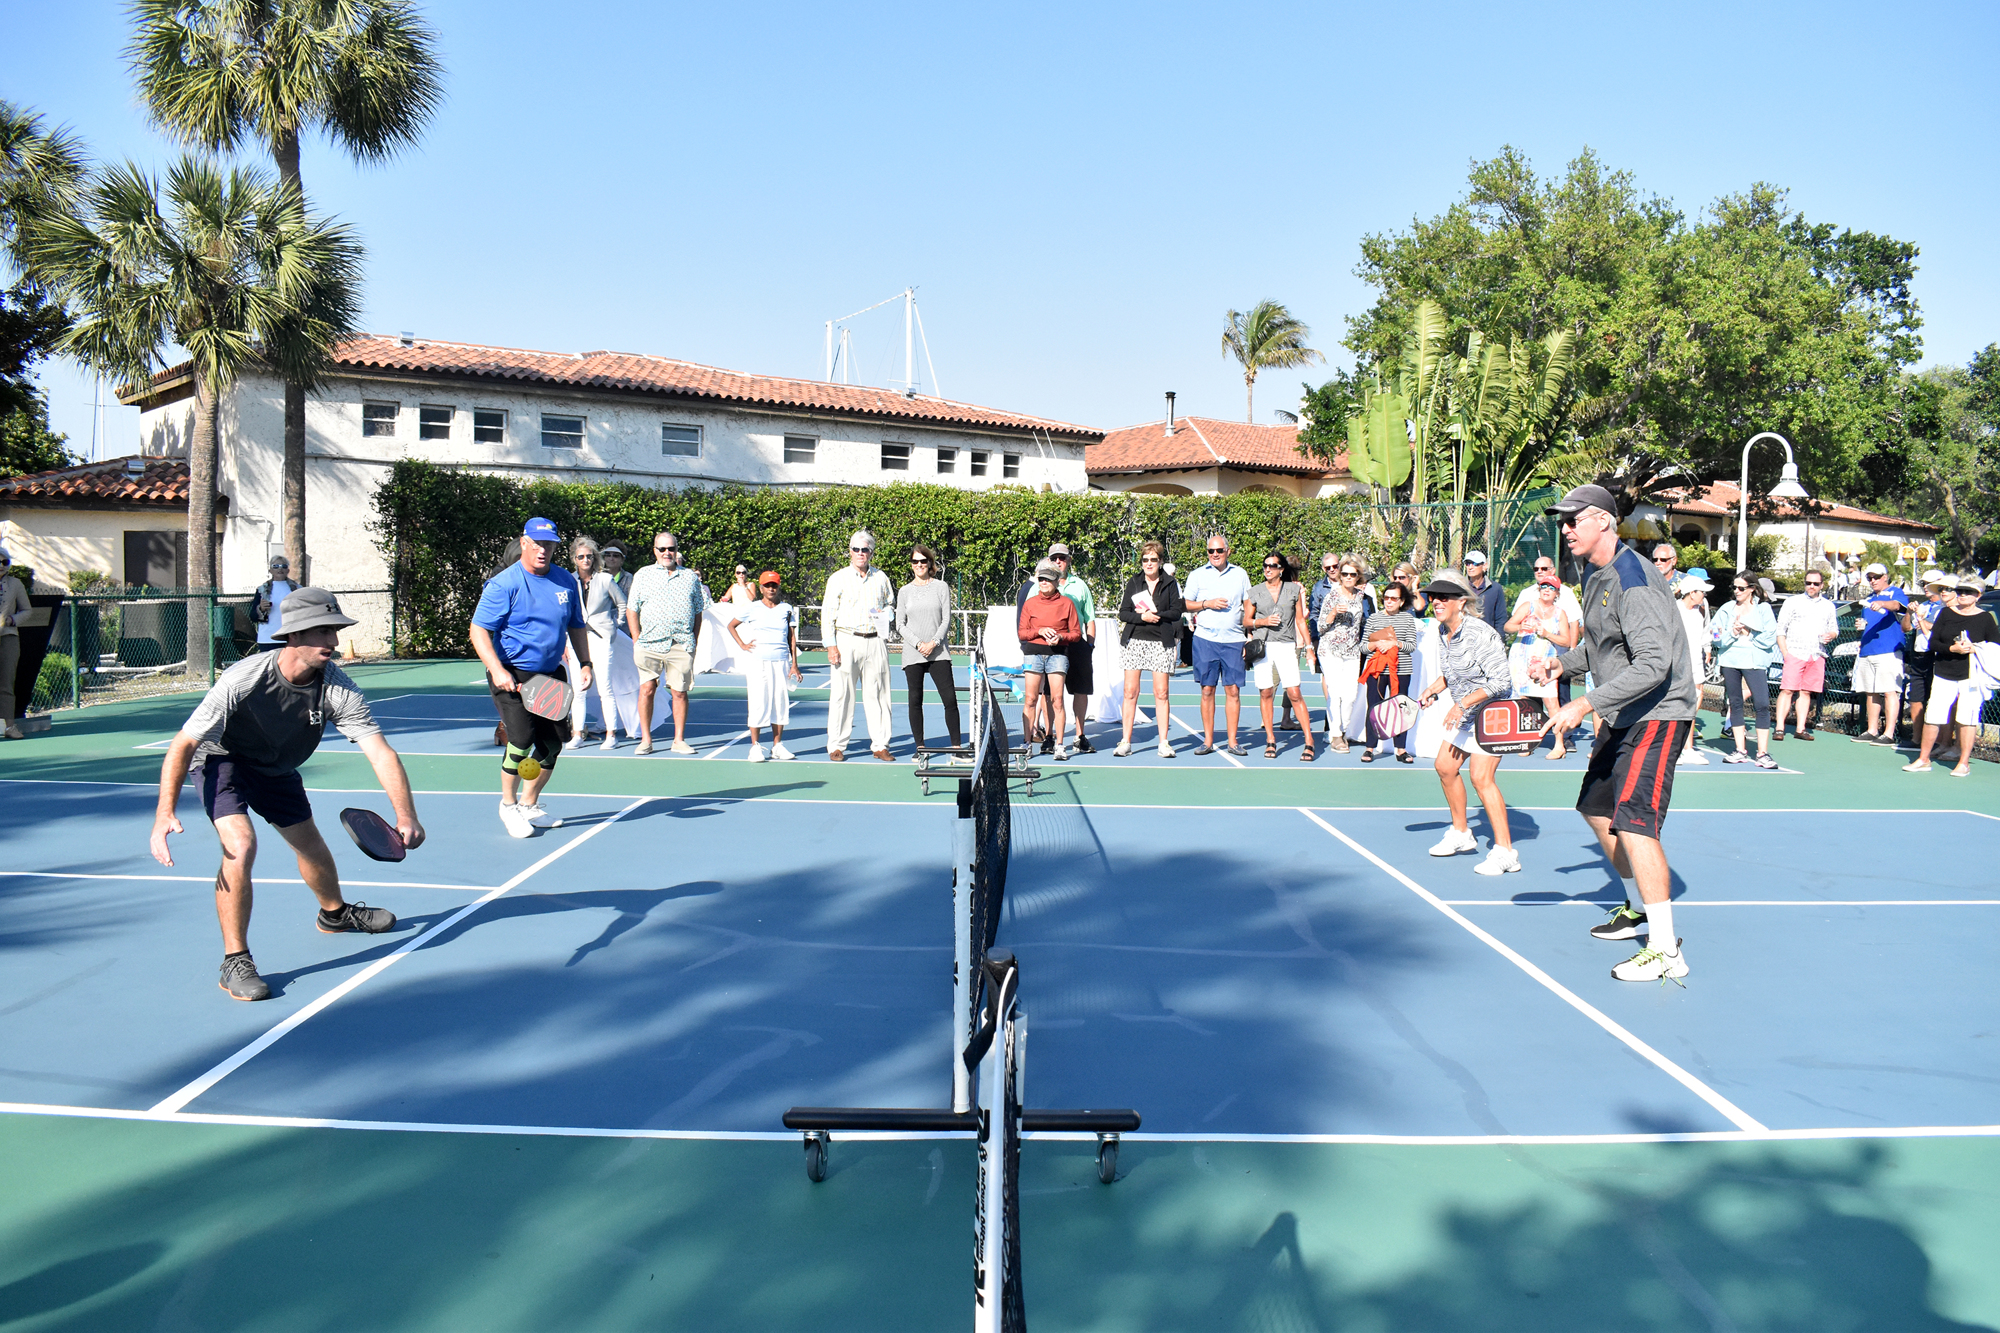 The Longboat Key Club opened its courts near the Harborside Marina in 2019.